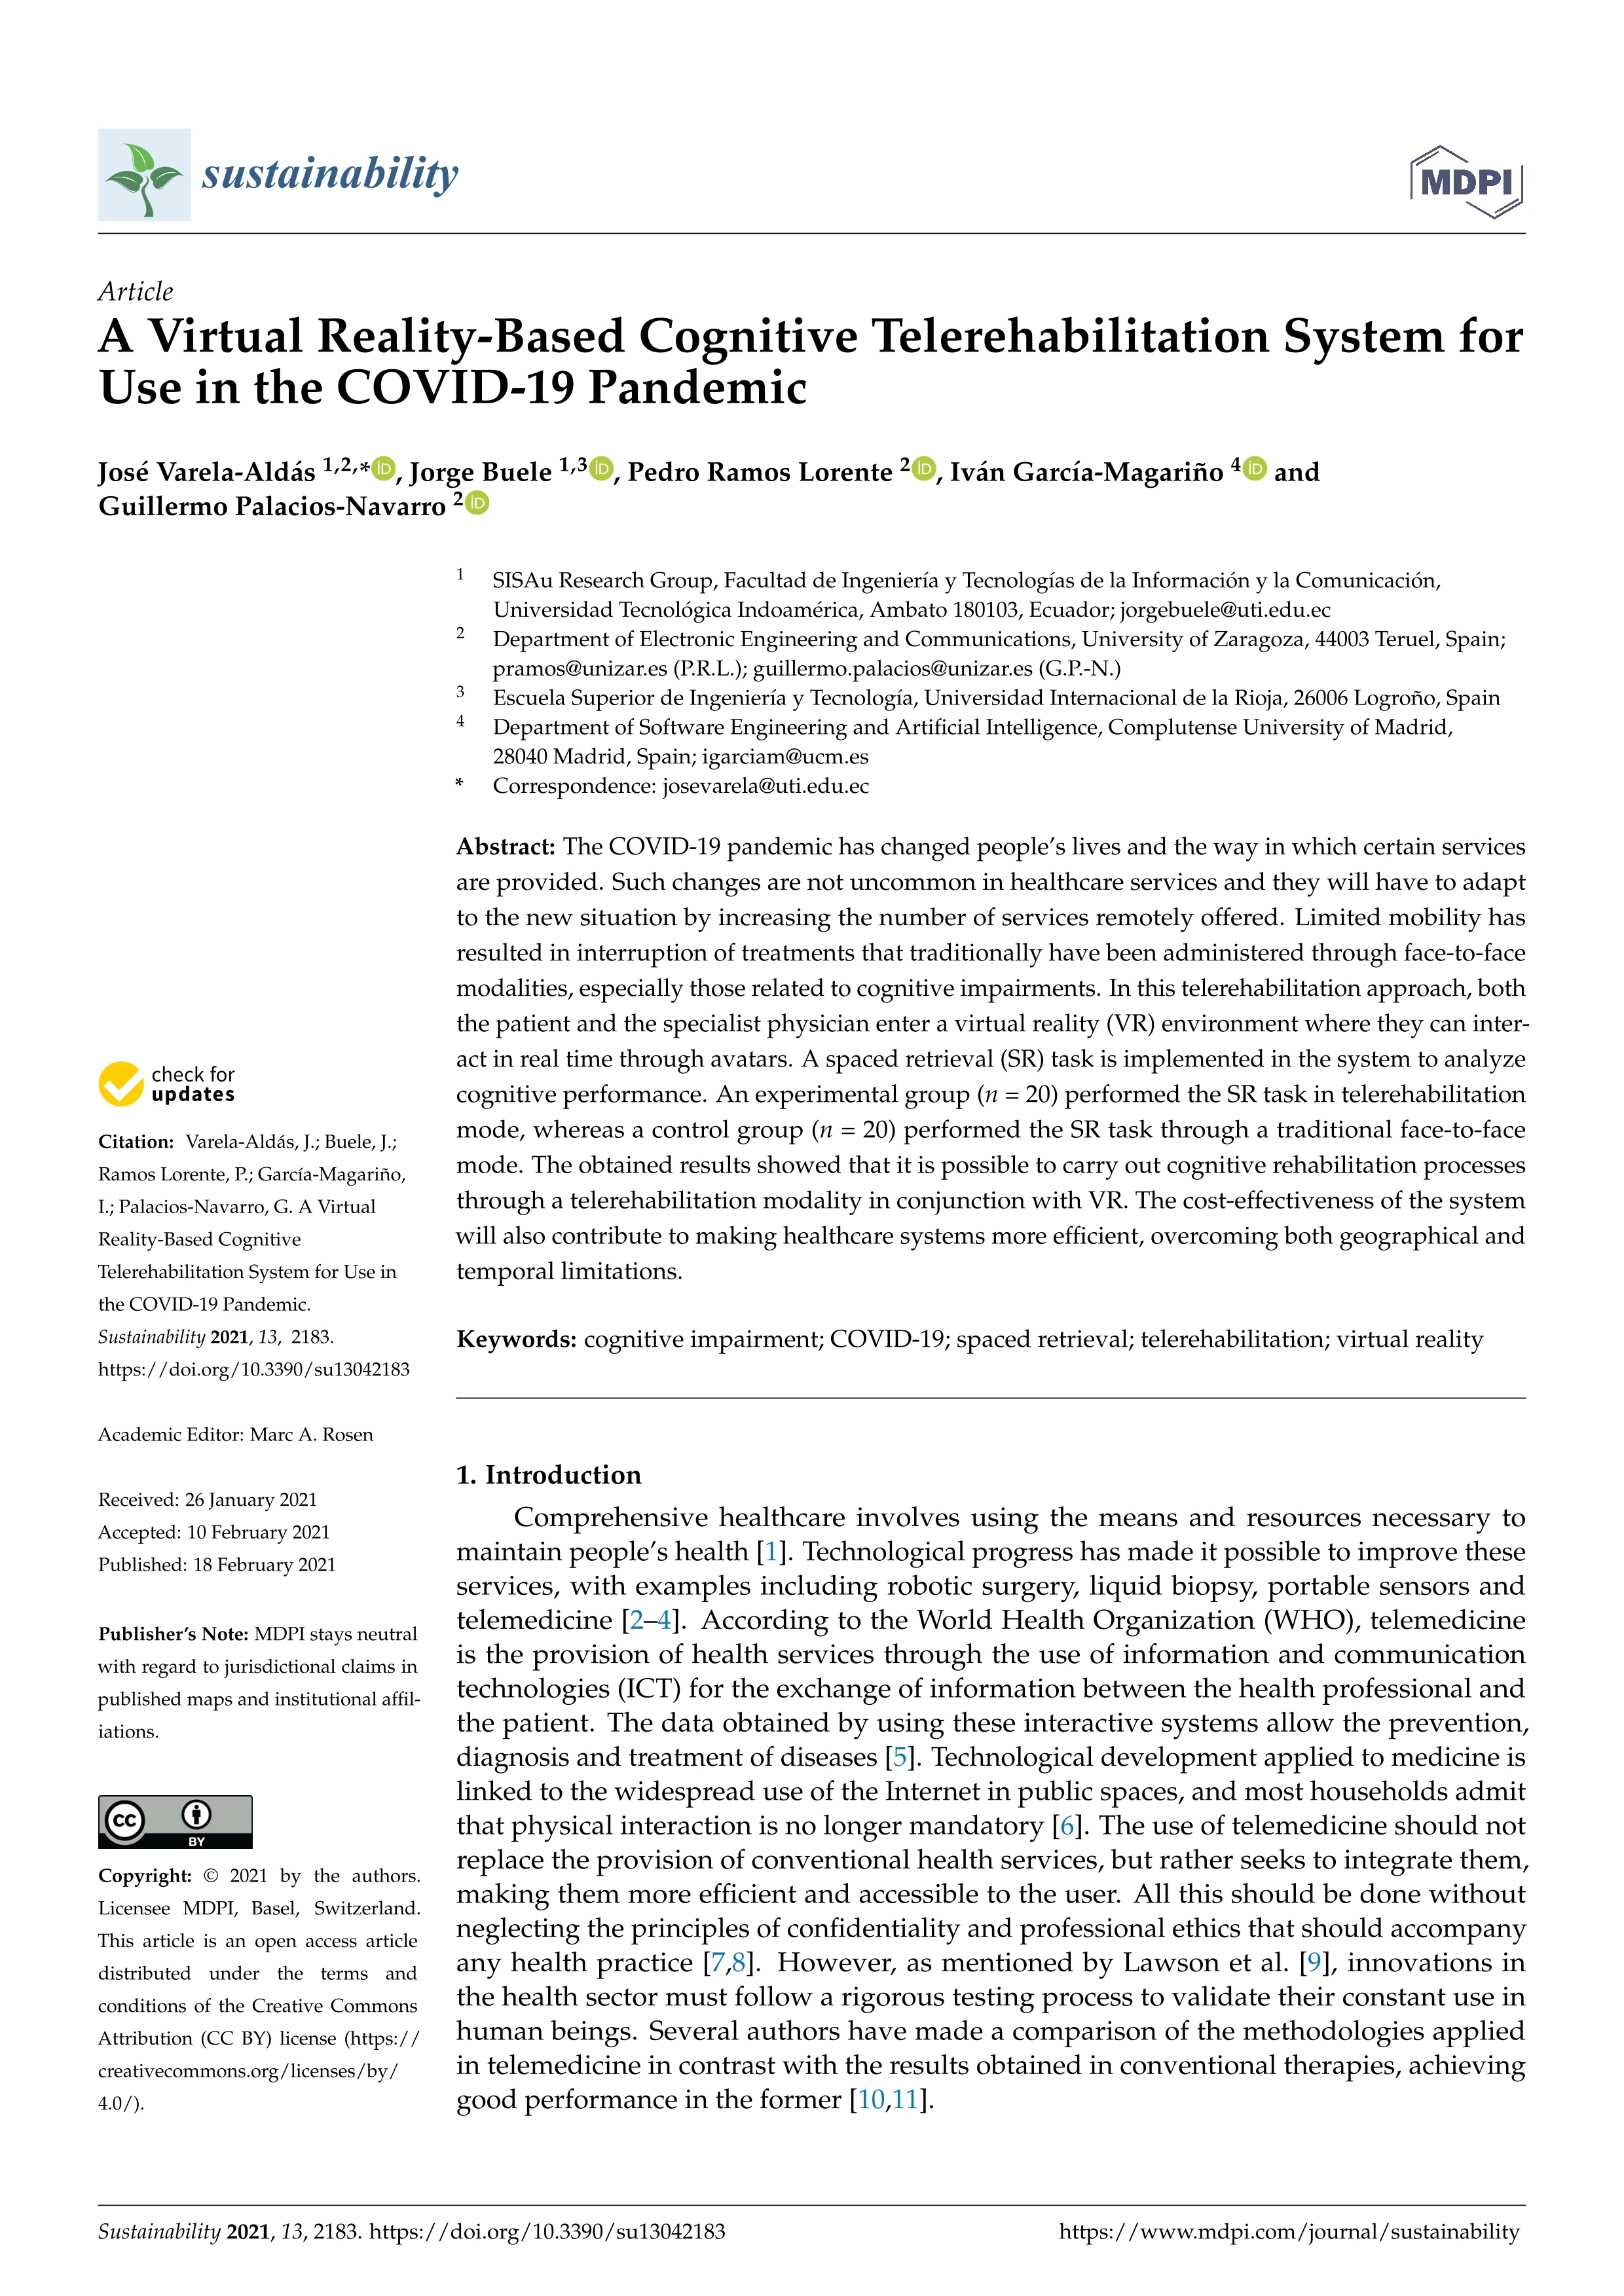 A virtual reality-based cognitive telerehabilitation system for use in the covid-19 pandemic